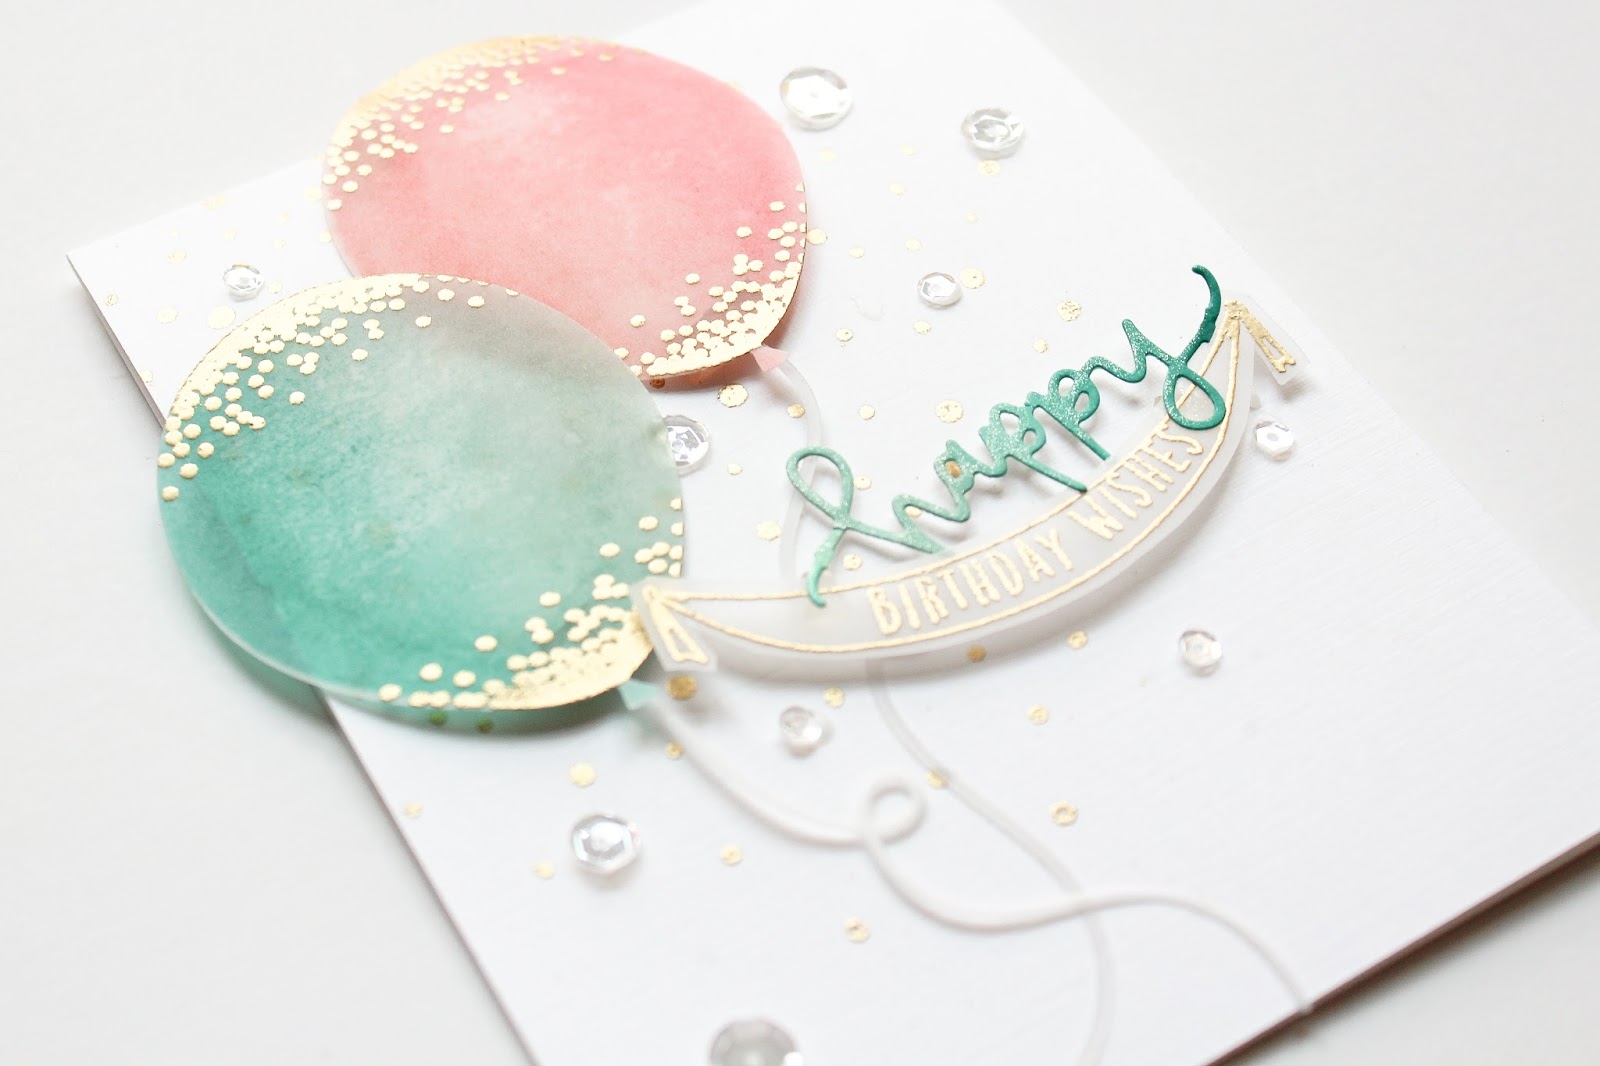  I'll be doing my stamping on vellum today...using regular ol' die ink. &nbsp;Well, I guess it's not regular ol'...I used the ombre ink pads from Hero arts to give my balloons an ombre effect. &nbsp;You can use any kind of dye ink to stamp on vellum.